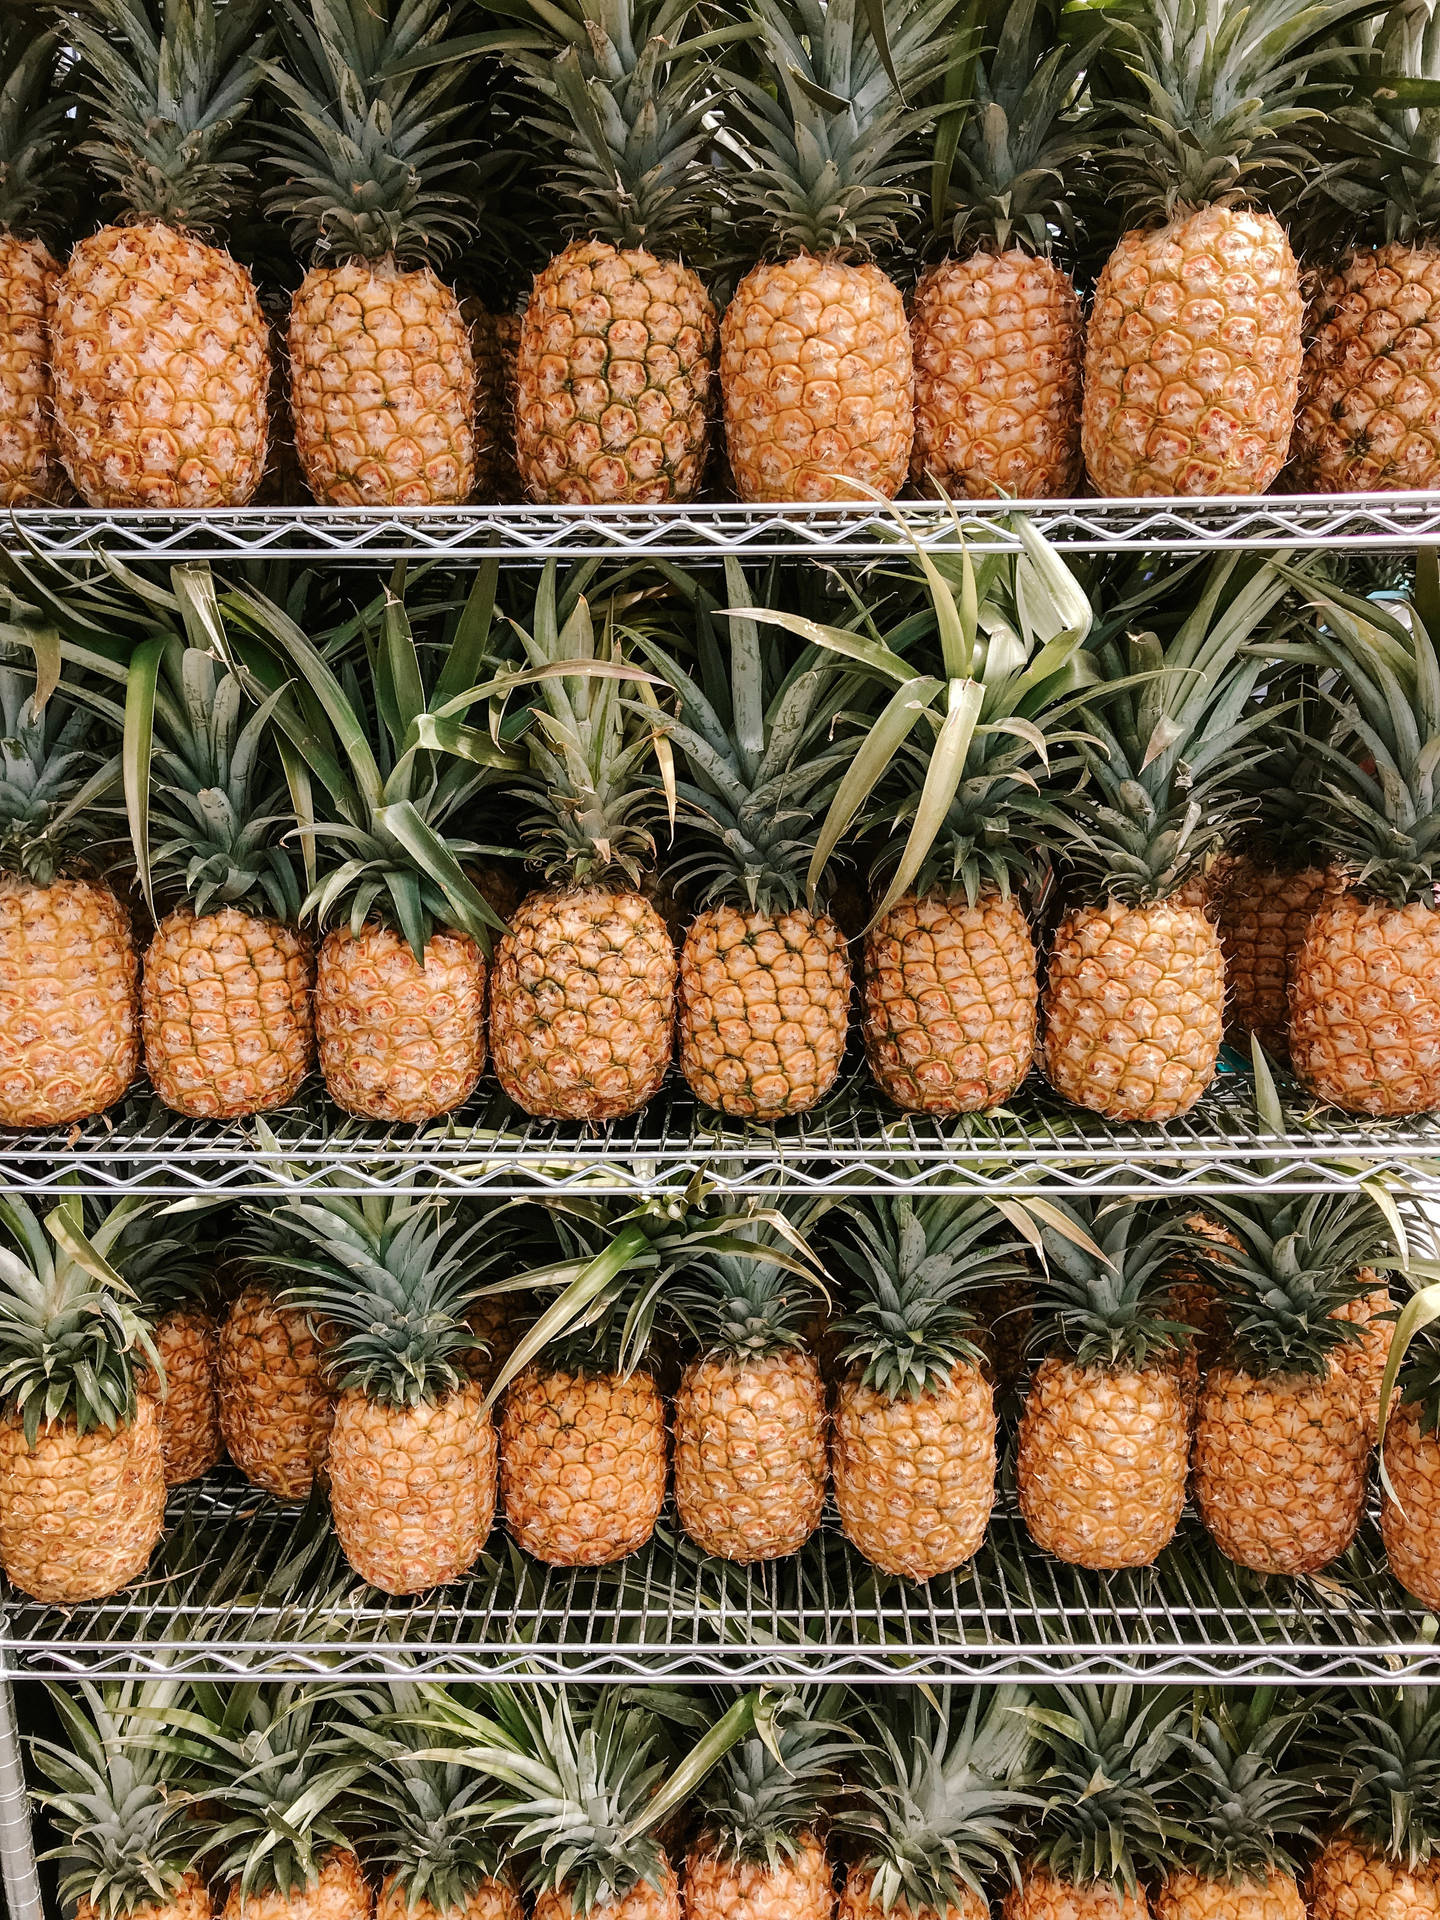 A Delicious Pineapple Ripening on a Shelf Wallpaper